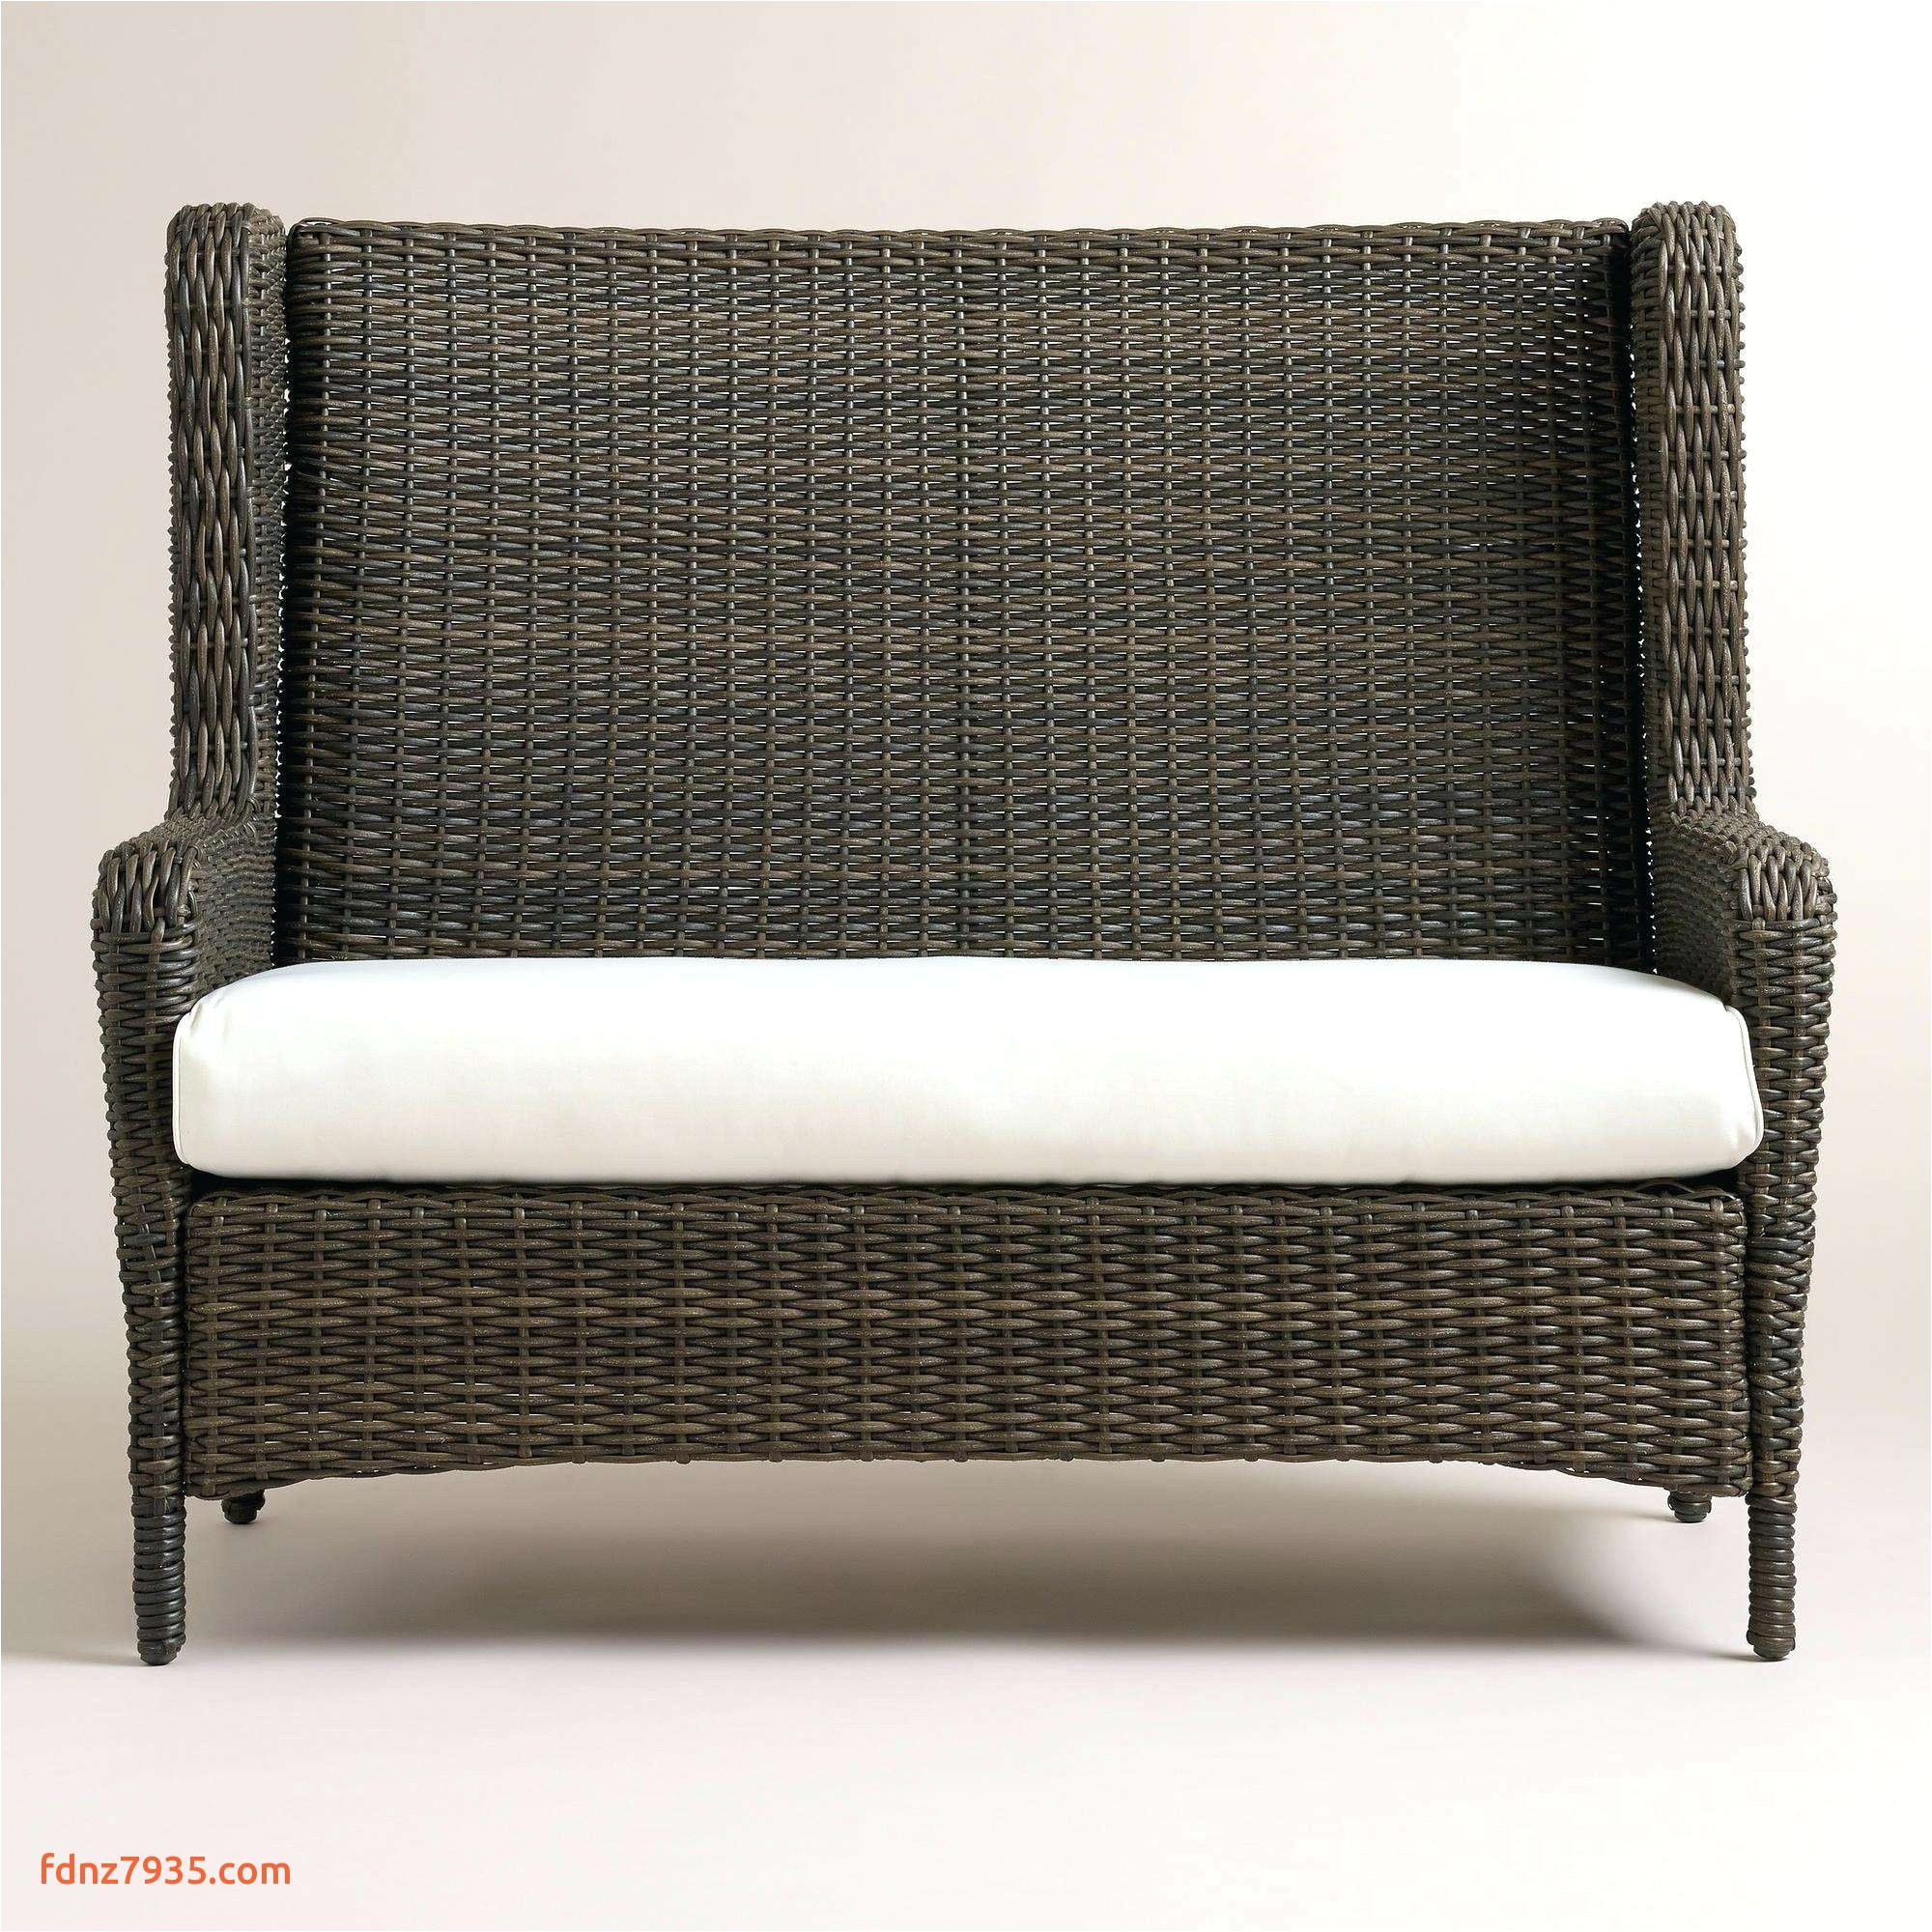 wicker outdoor sofa 0d patio chairs sale replacement cushions ideas ideas wrought iron outdoor furniture